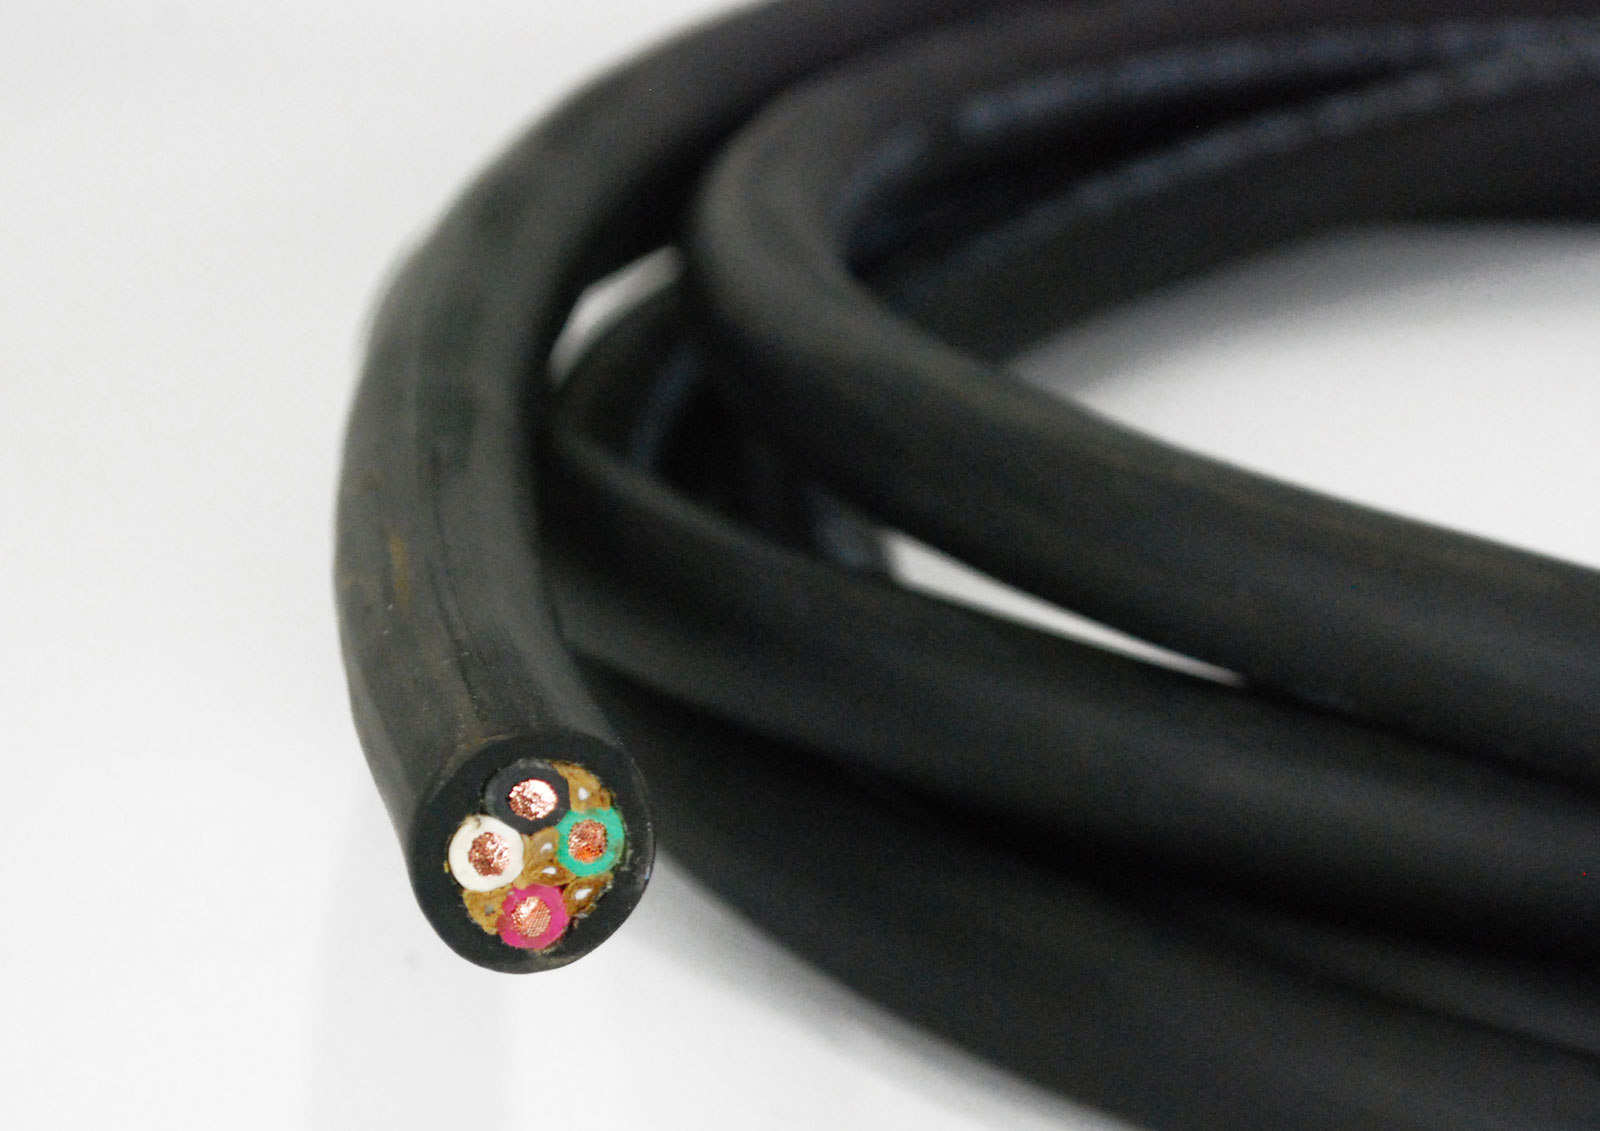 NEW 75' 14/4 SOOW SO SOO  BLACK RUBBER CORD EXTENSION WIRE 